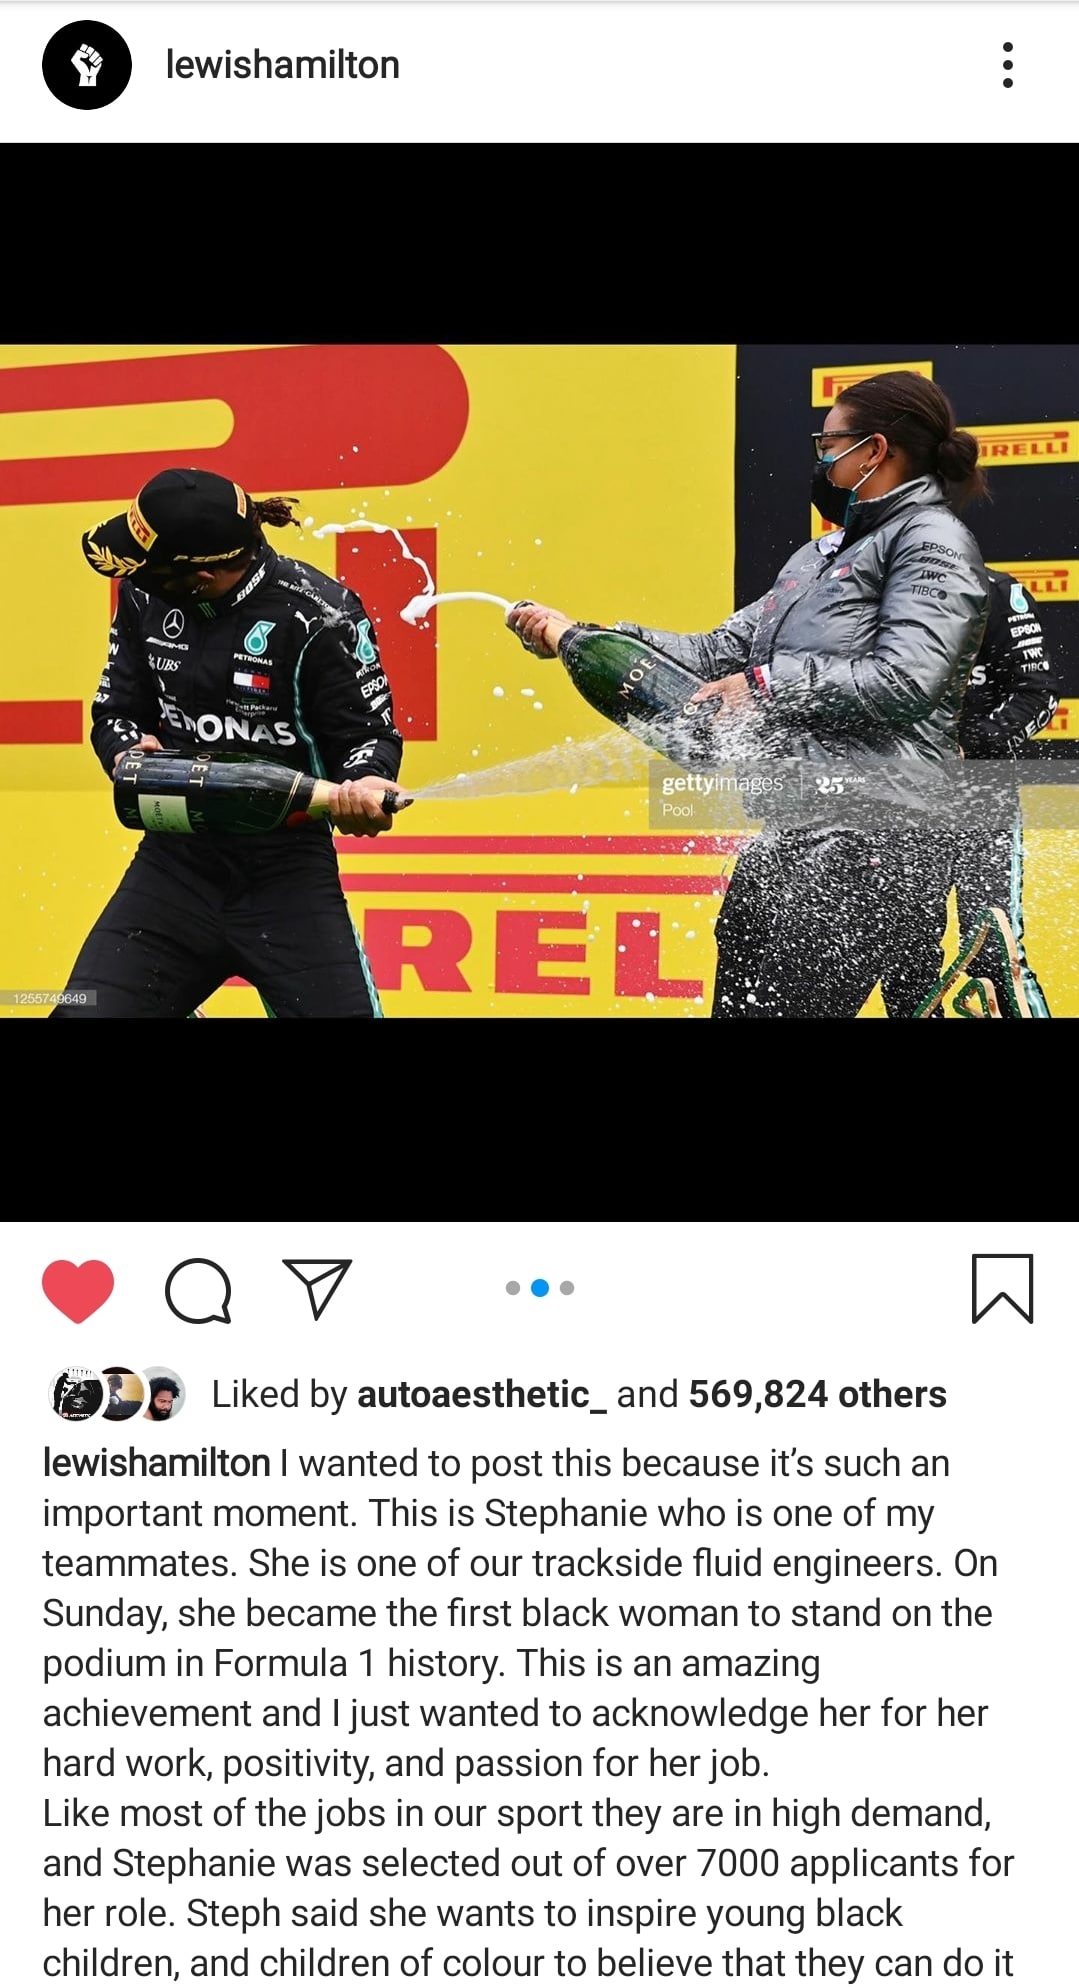 Tweets, Lewis, Mercedes, Hamilton, Fernando, GOAT Black Twitter Memes Tweets, Lewis, Mercedes, Hamilton, Fernando, GOAT text: lewishamilton ONAS Liked by autoaesthetic_ and 569,824 others lewishamilton I wanted to post this because it's such an important moment. This is Stephanie who is one of my teammates. She is one of our trackside fluid engineers. On Sunday, she became the first black woman to stand on the podium in Formula 1 history. This is an amazing achievement and I just wanted to acknowledge her for her hard work, positivity, and passion for her job. Like most of the jobs in our sport they are in high demand, and Stephanie was selected out of over 7000 applicants for her role. Steph said she wants to inspire young black children, and children of colour to believe that they can do it 